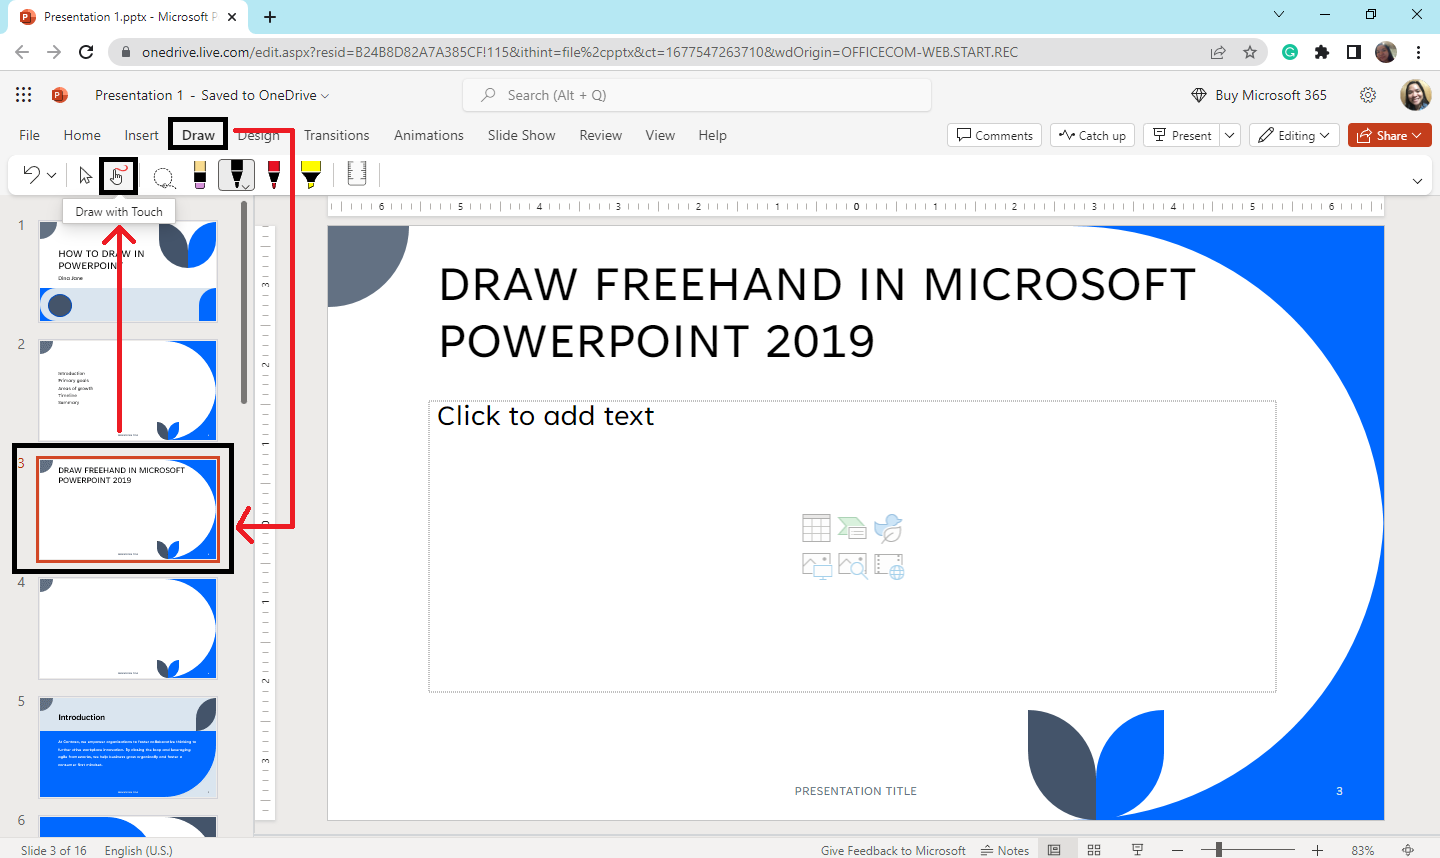 Select "Draw" tab and click "Draw with Touch."